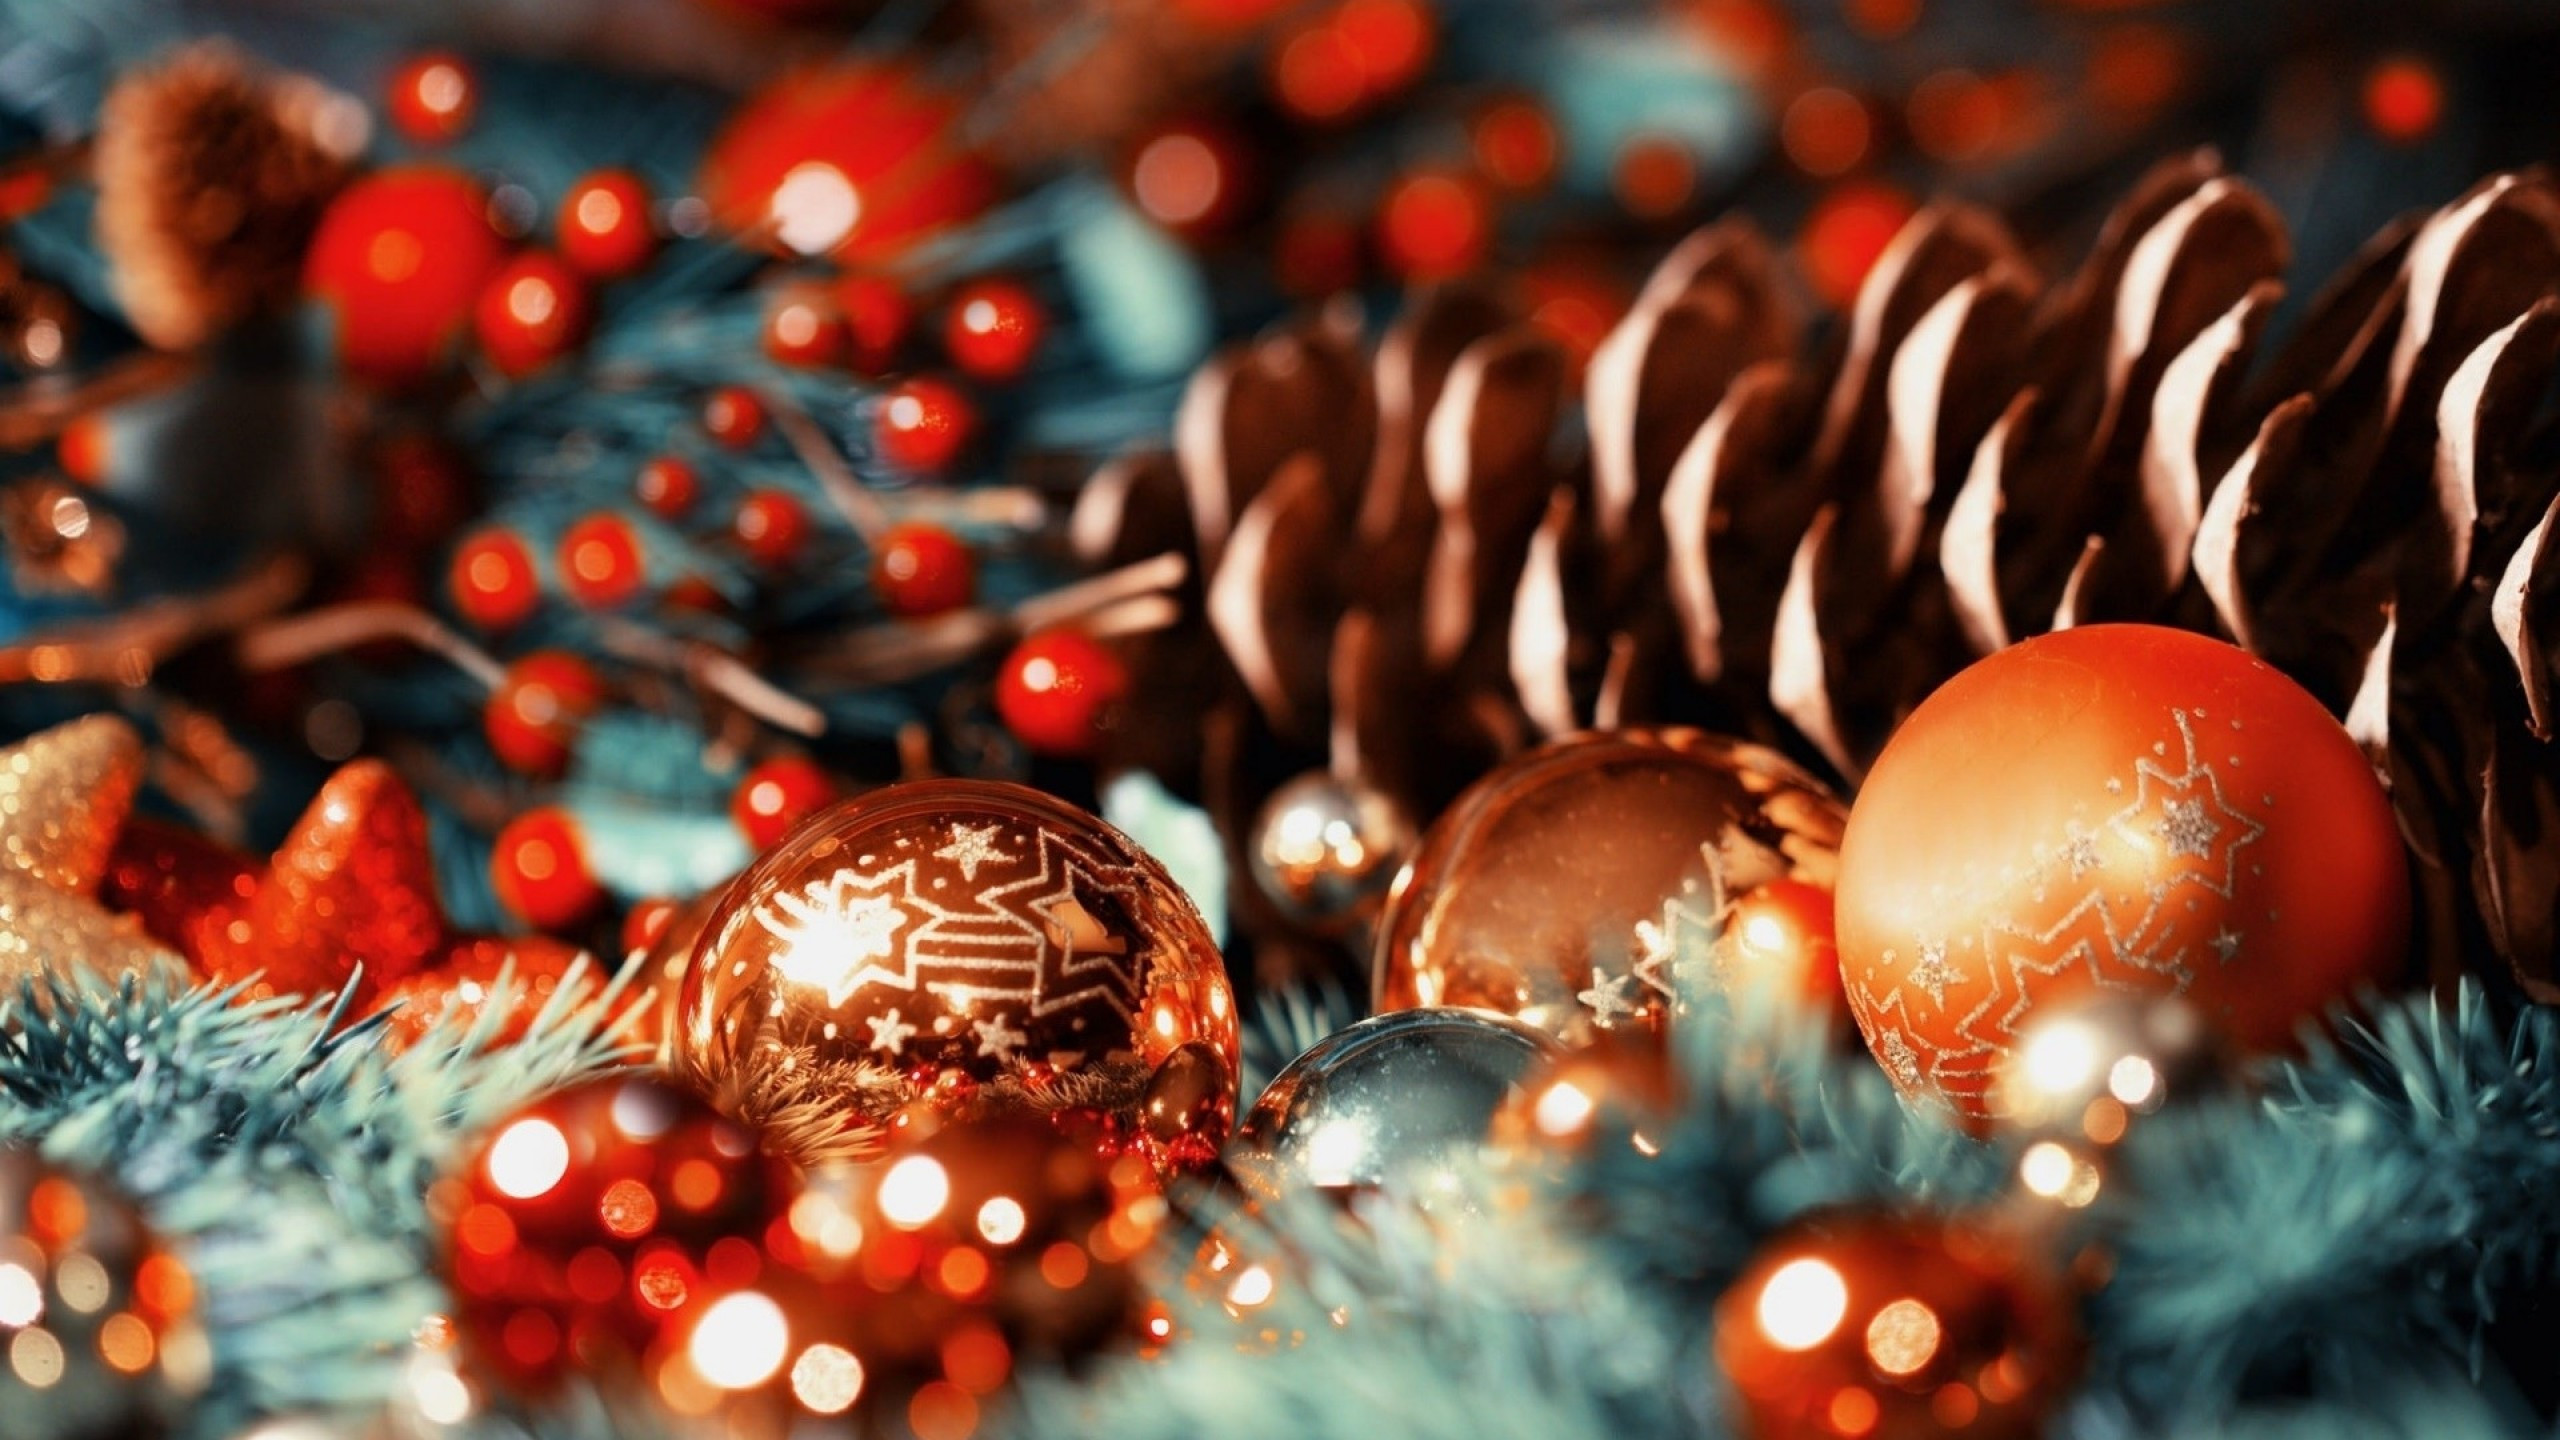 Download 2560x1440 Christmas Decorations, Ornaments, Close Up Wallpaper For IMac 27 Inch